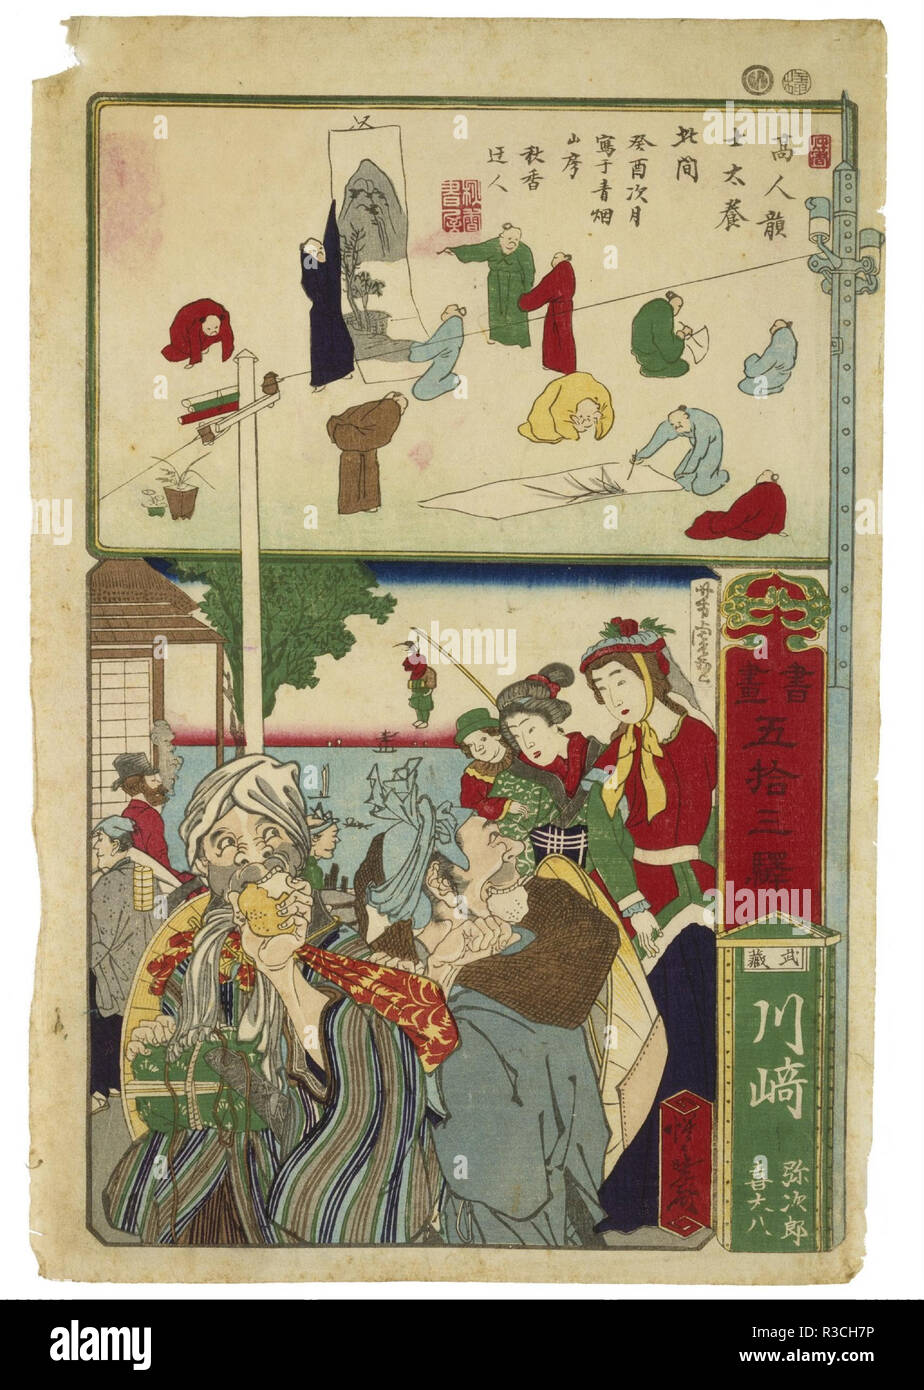 Korasaki: One of the 53 Tokaido Stations (between Tokyo and Kyoto). Date/Period: 1831/1889. Woodblock print. Width: 24.6 cm. Height: 36.8 cm (overall). Author: KAWANABE KYOSAI. Stock Photo